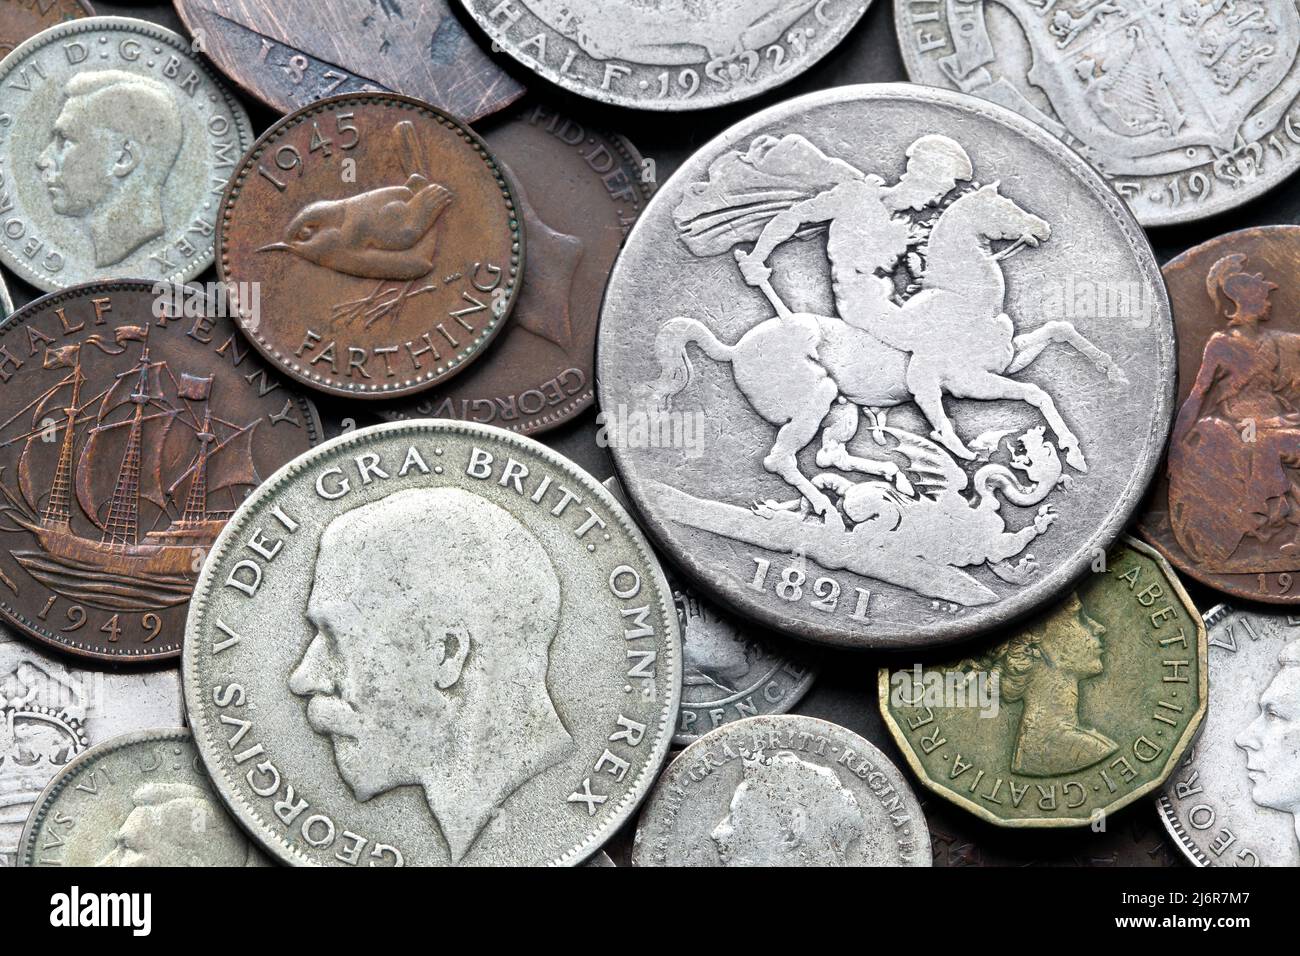 A selection of old British coins from the nineteenth and twentieth century, including an 1821 silver crown from the reign of George IV. Stock Photo